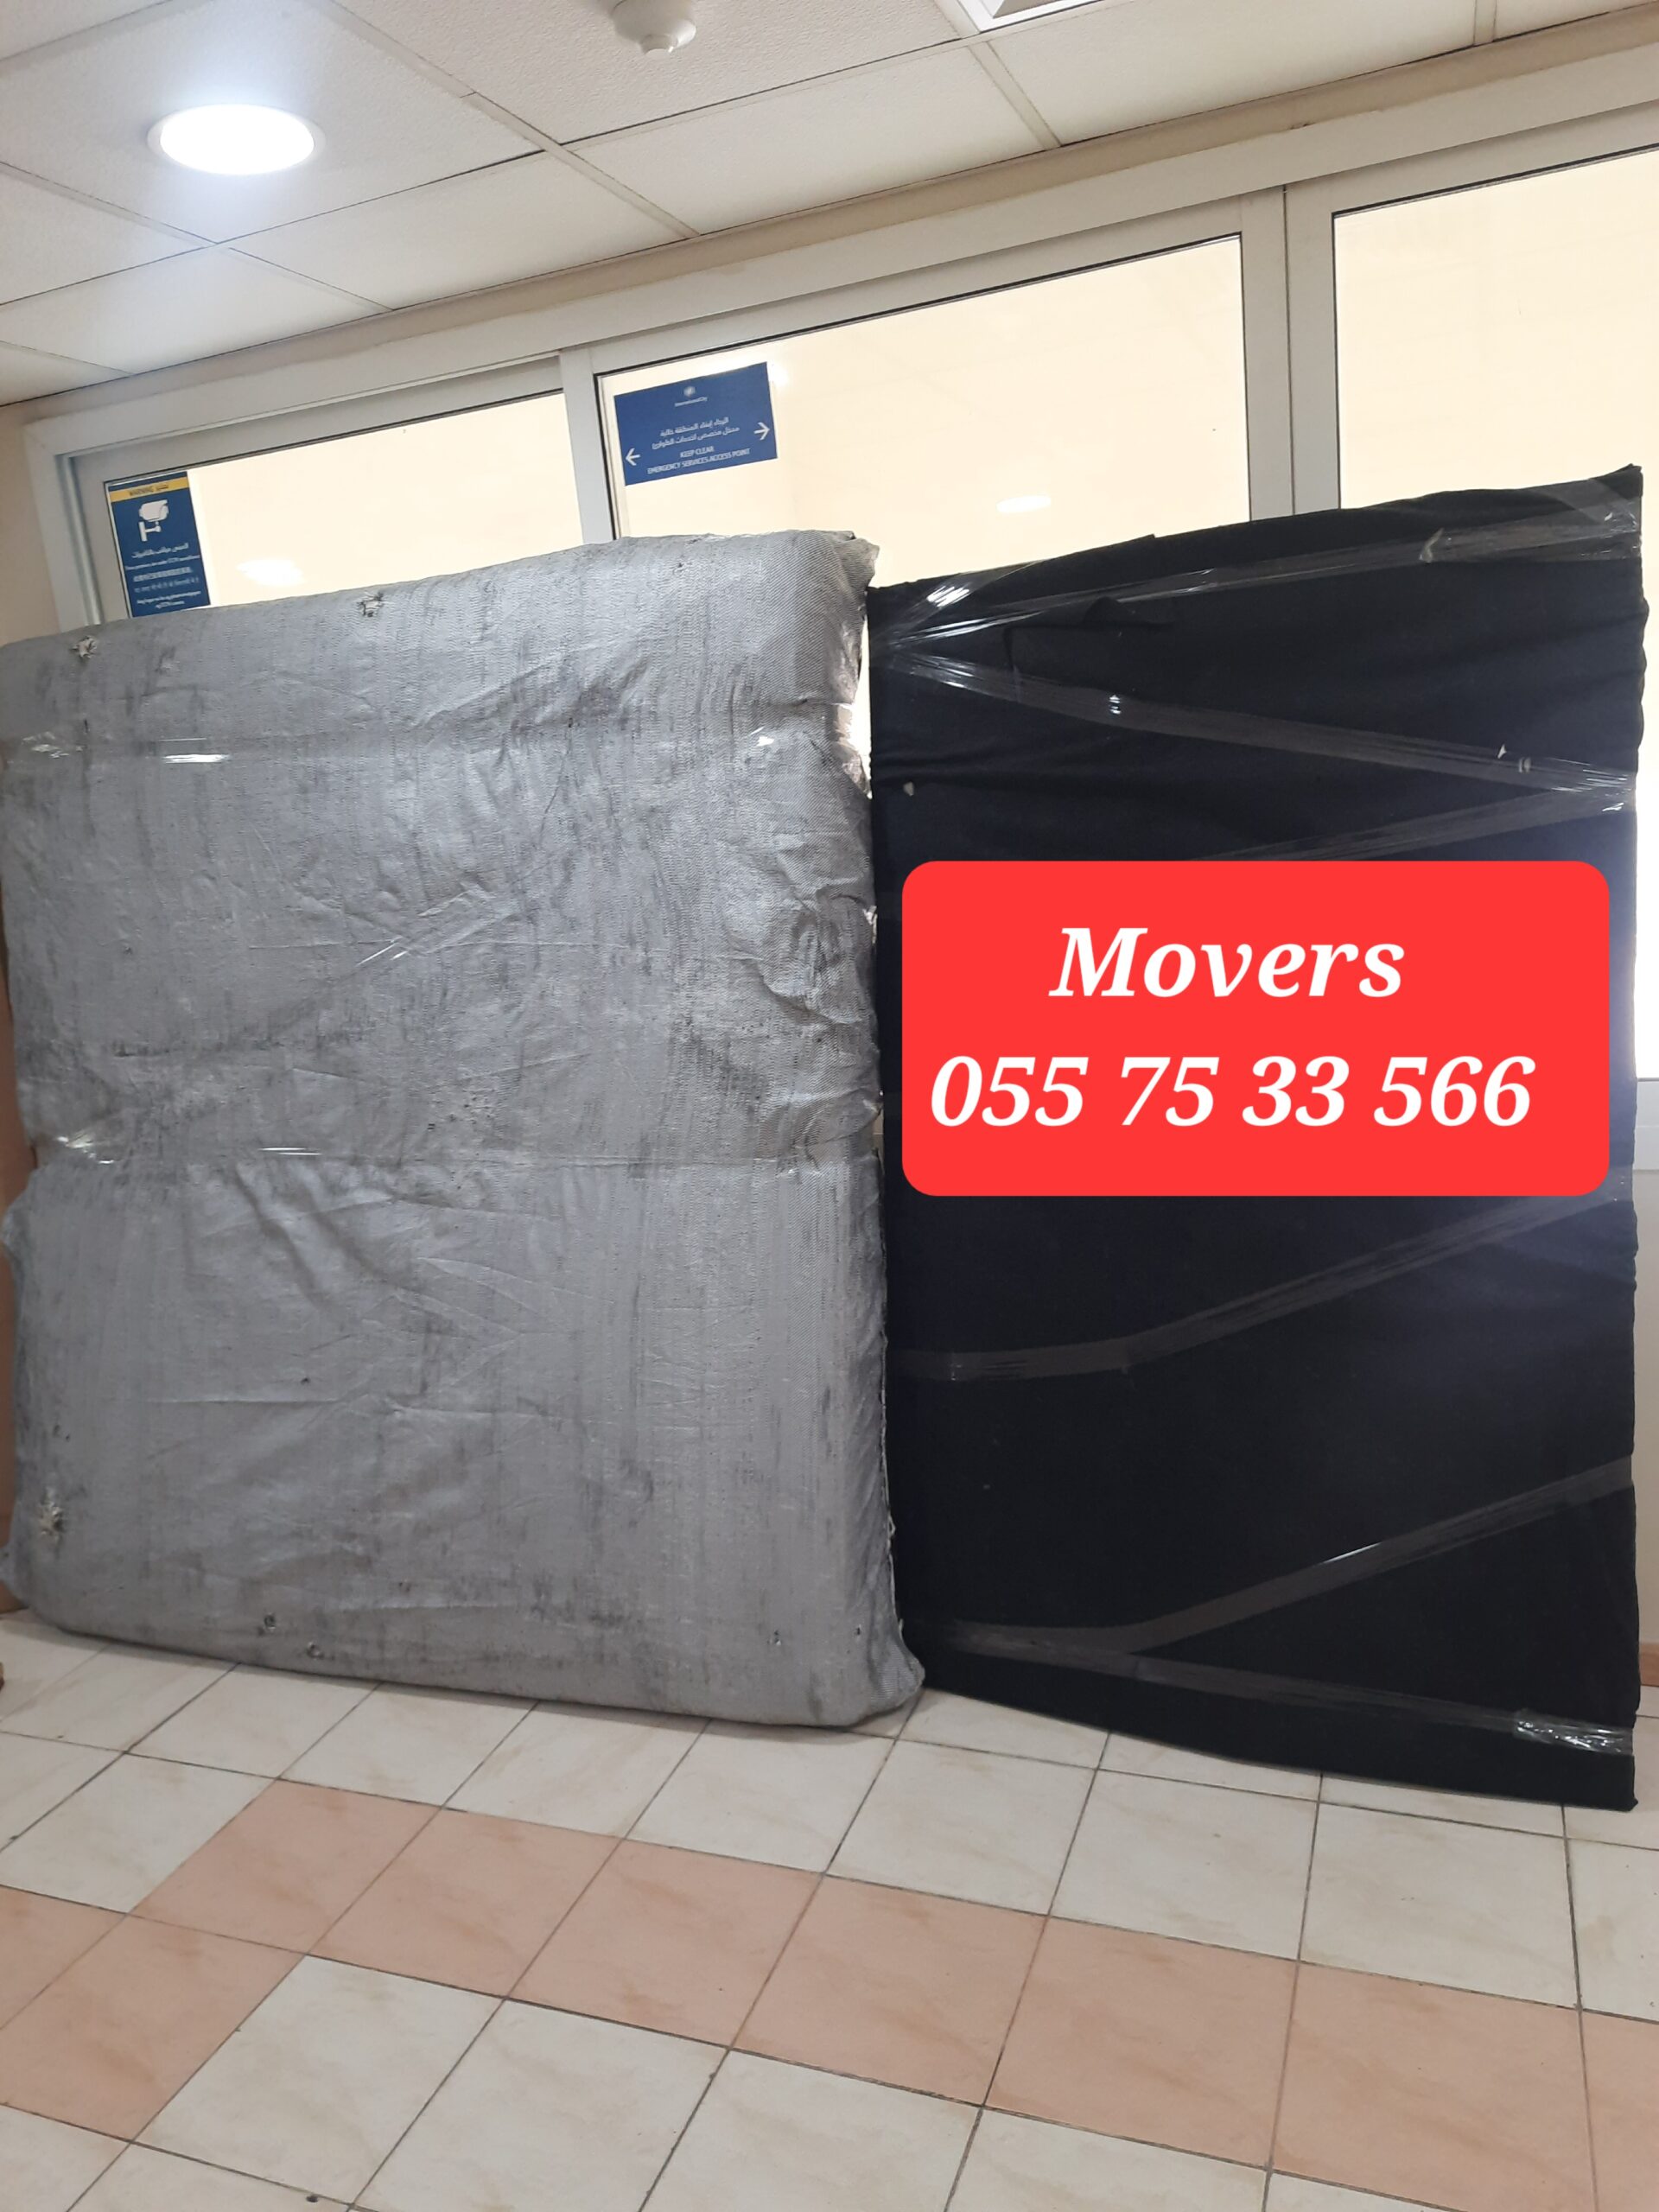 PROFESSIONAL MOVERS AND PACKERS IN DUBAI 055 75 33 566